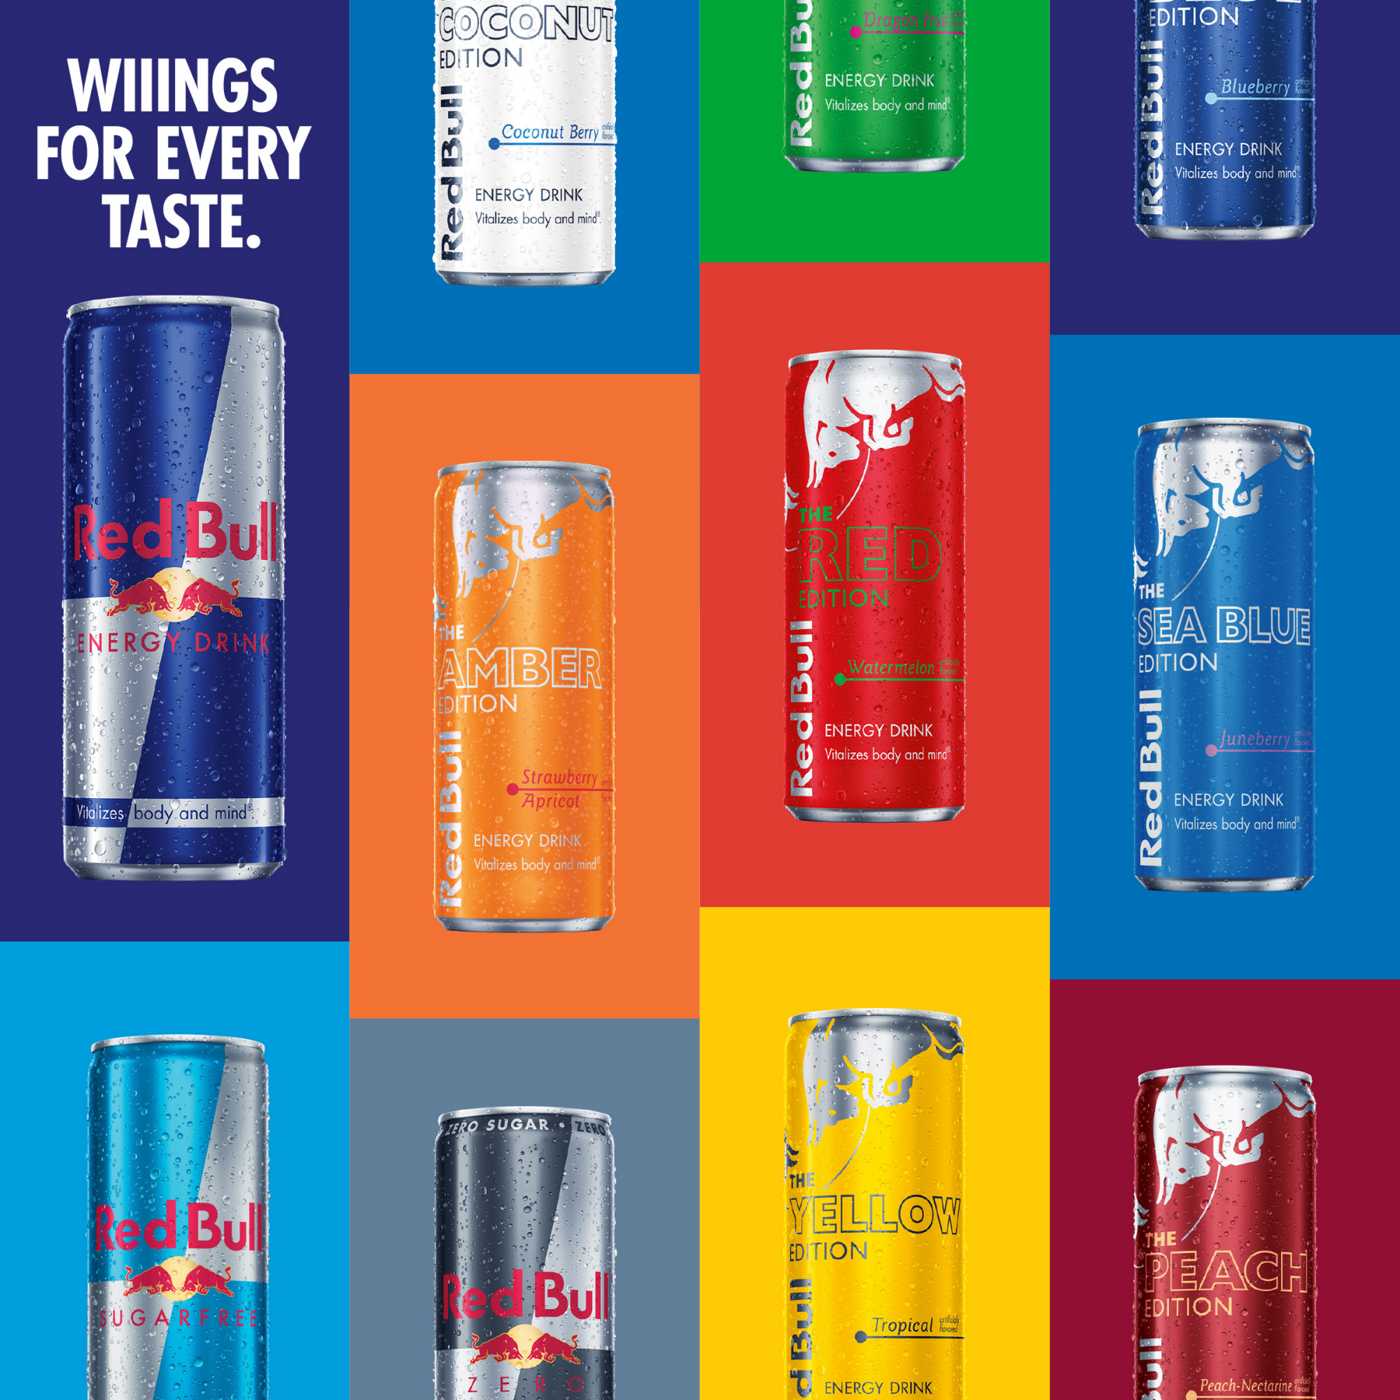 Red Bull Sea Blue Edition Juneberry Energy Drink; image 4 of 10